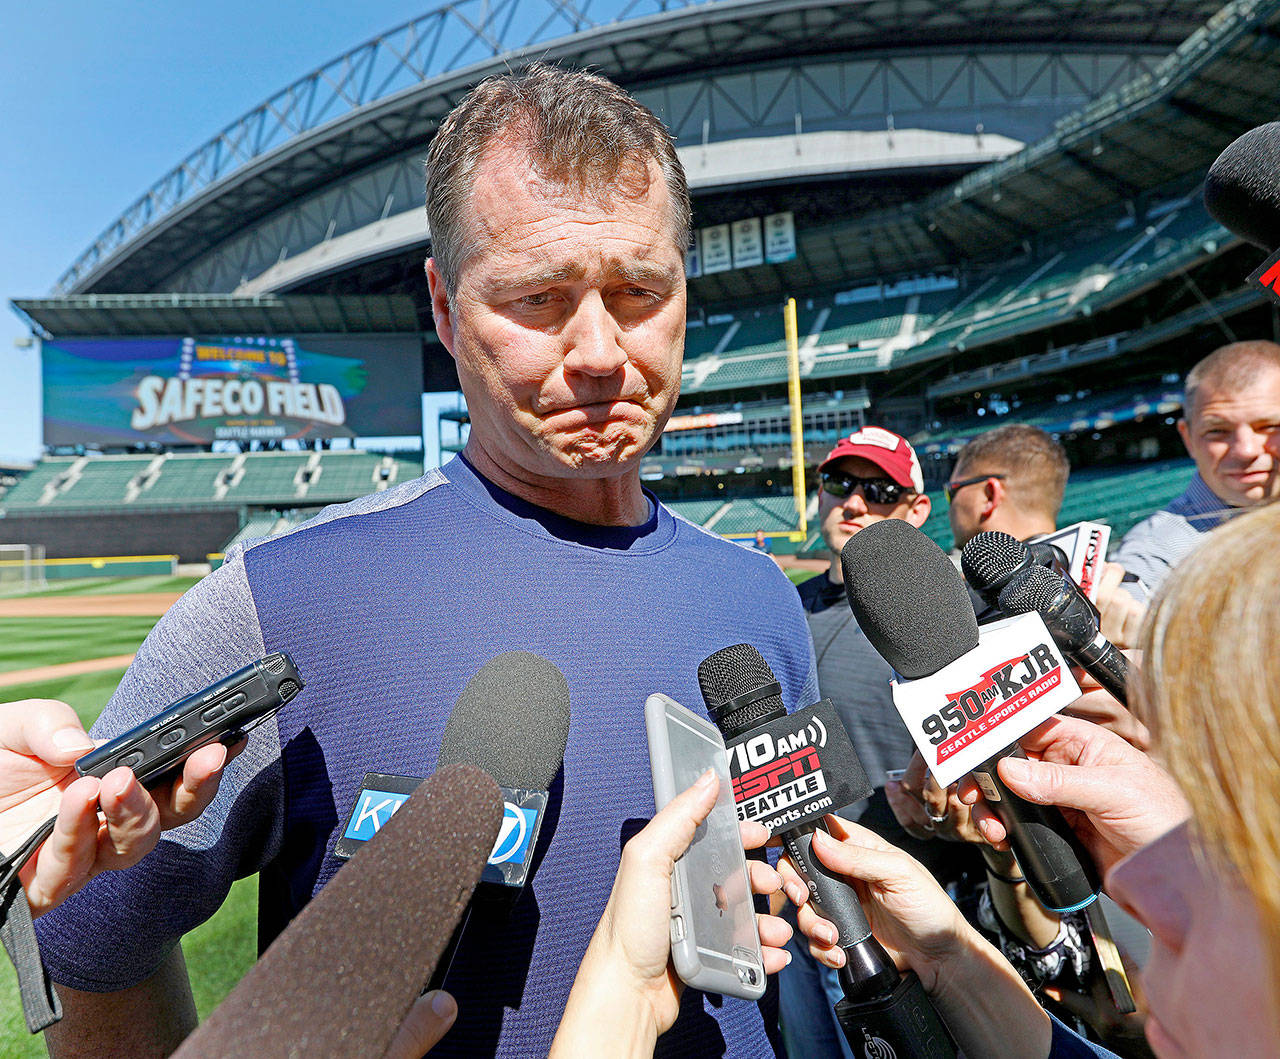 Mariners manager Scott Servais on Robinson Cano suspension: ‘The plan is to get to the playoffs and that will continue to be the goal’